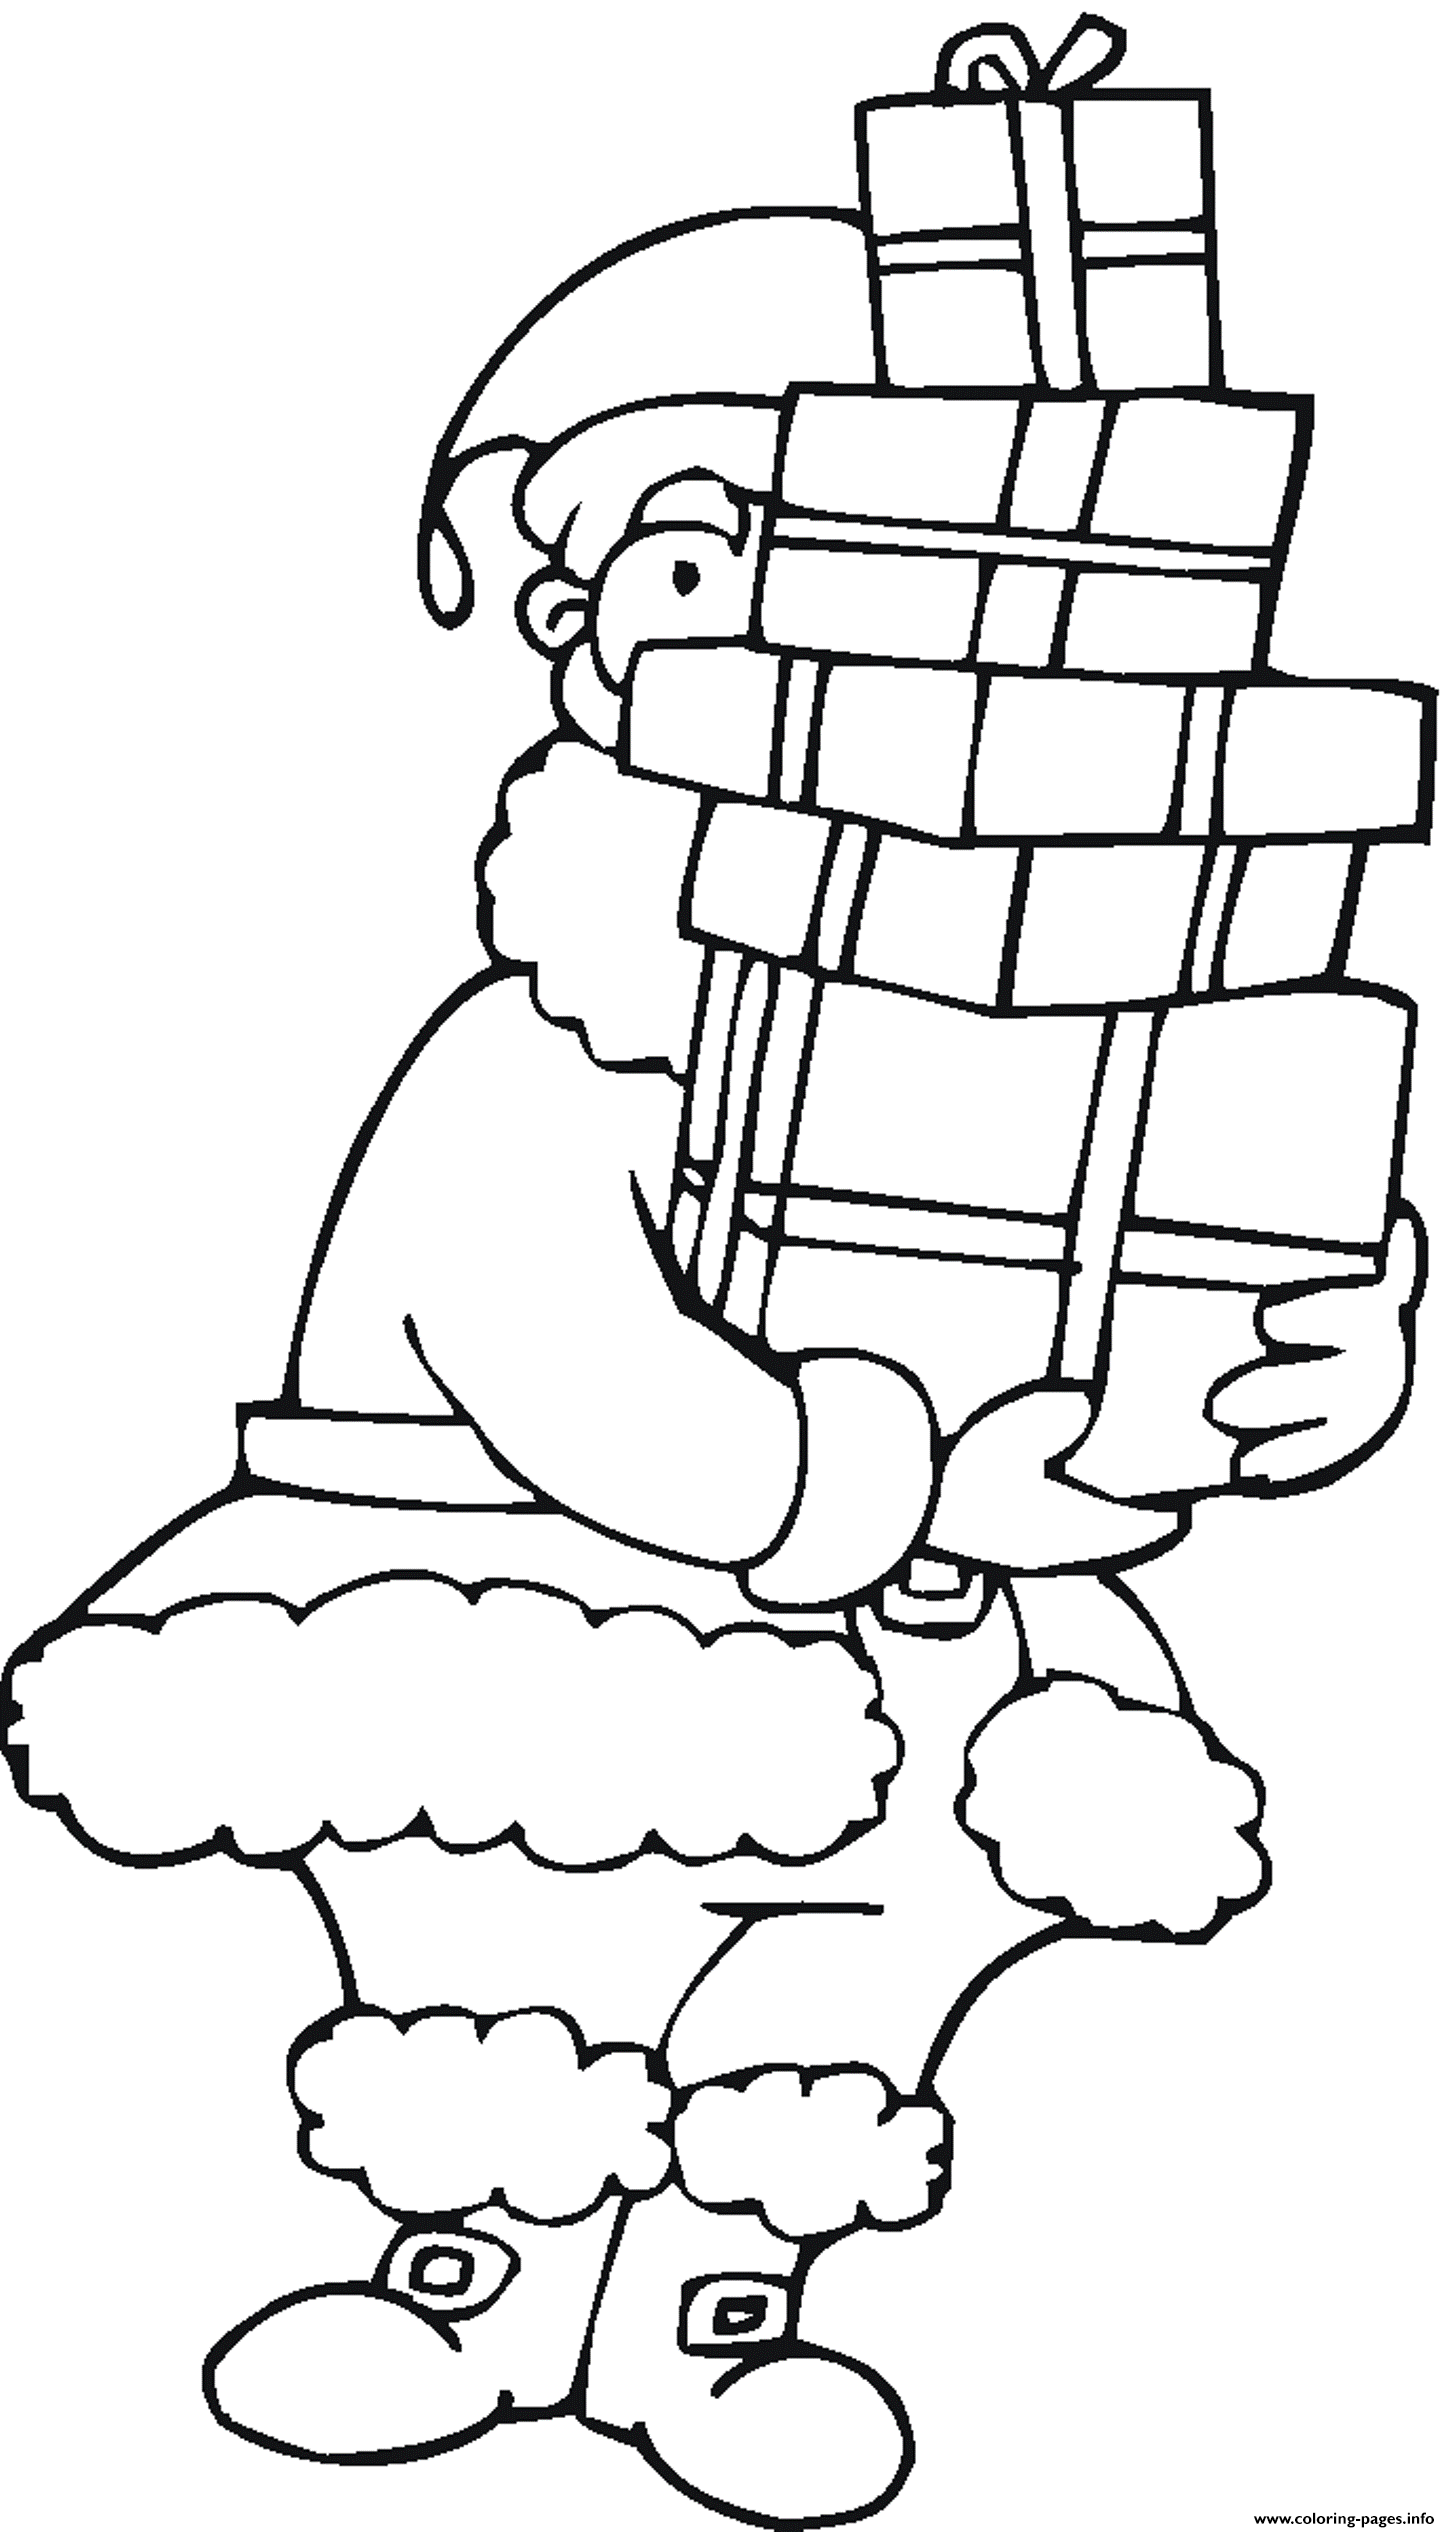 Coloring Pages Of Santa Claus Gives You Presents7df2 coloring